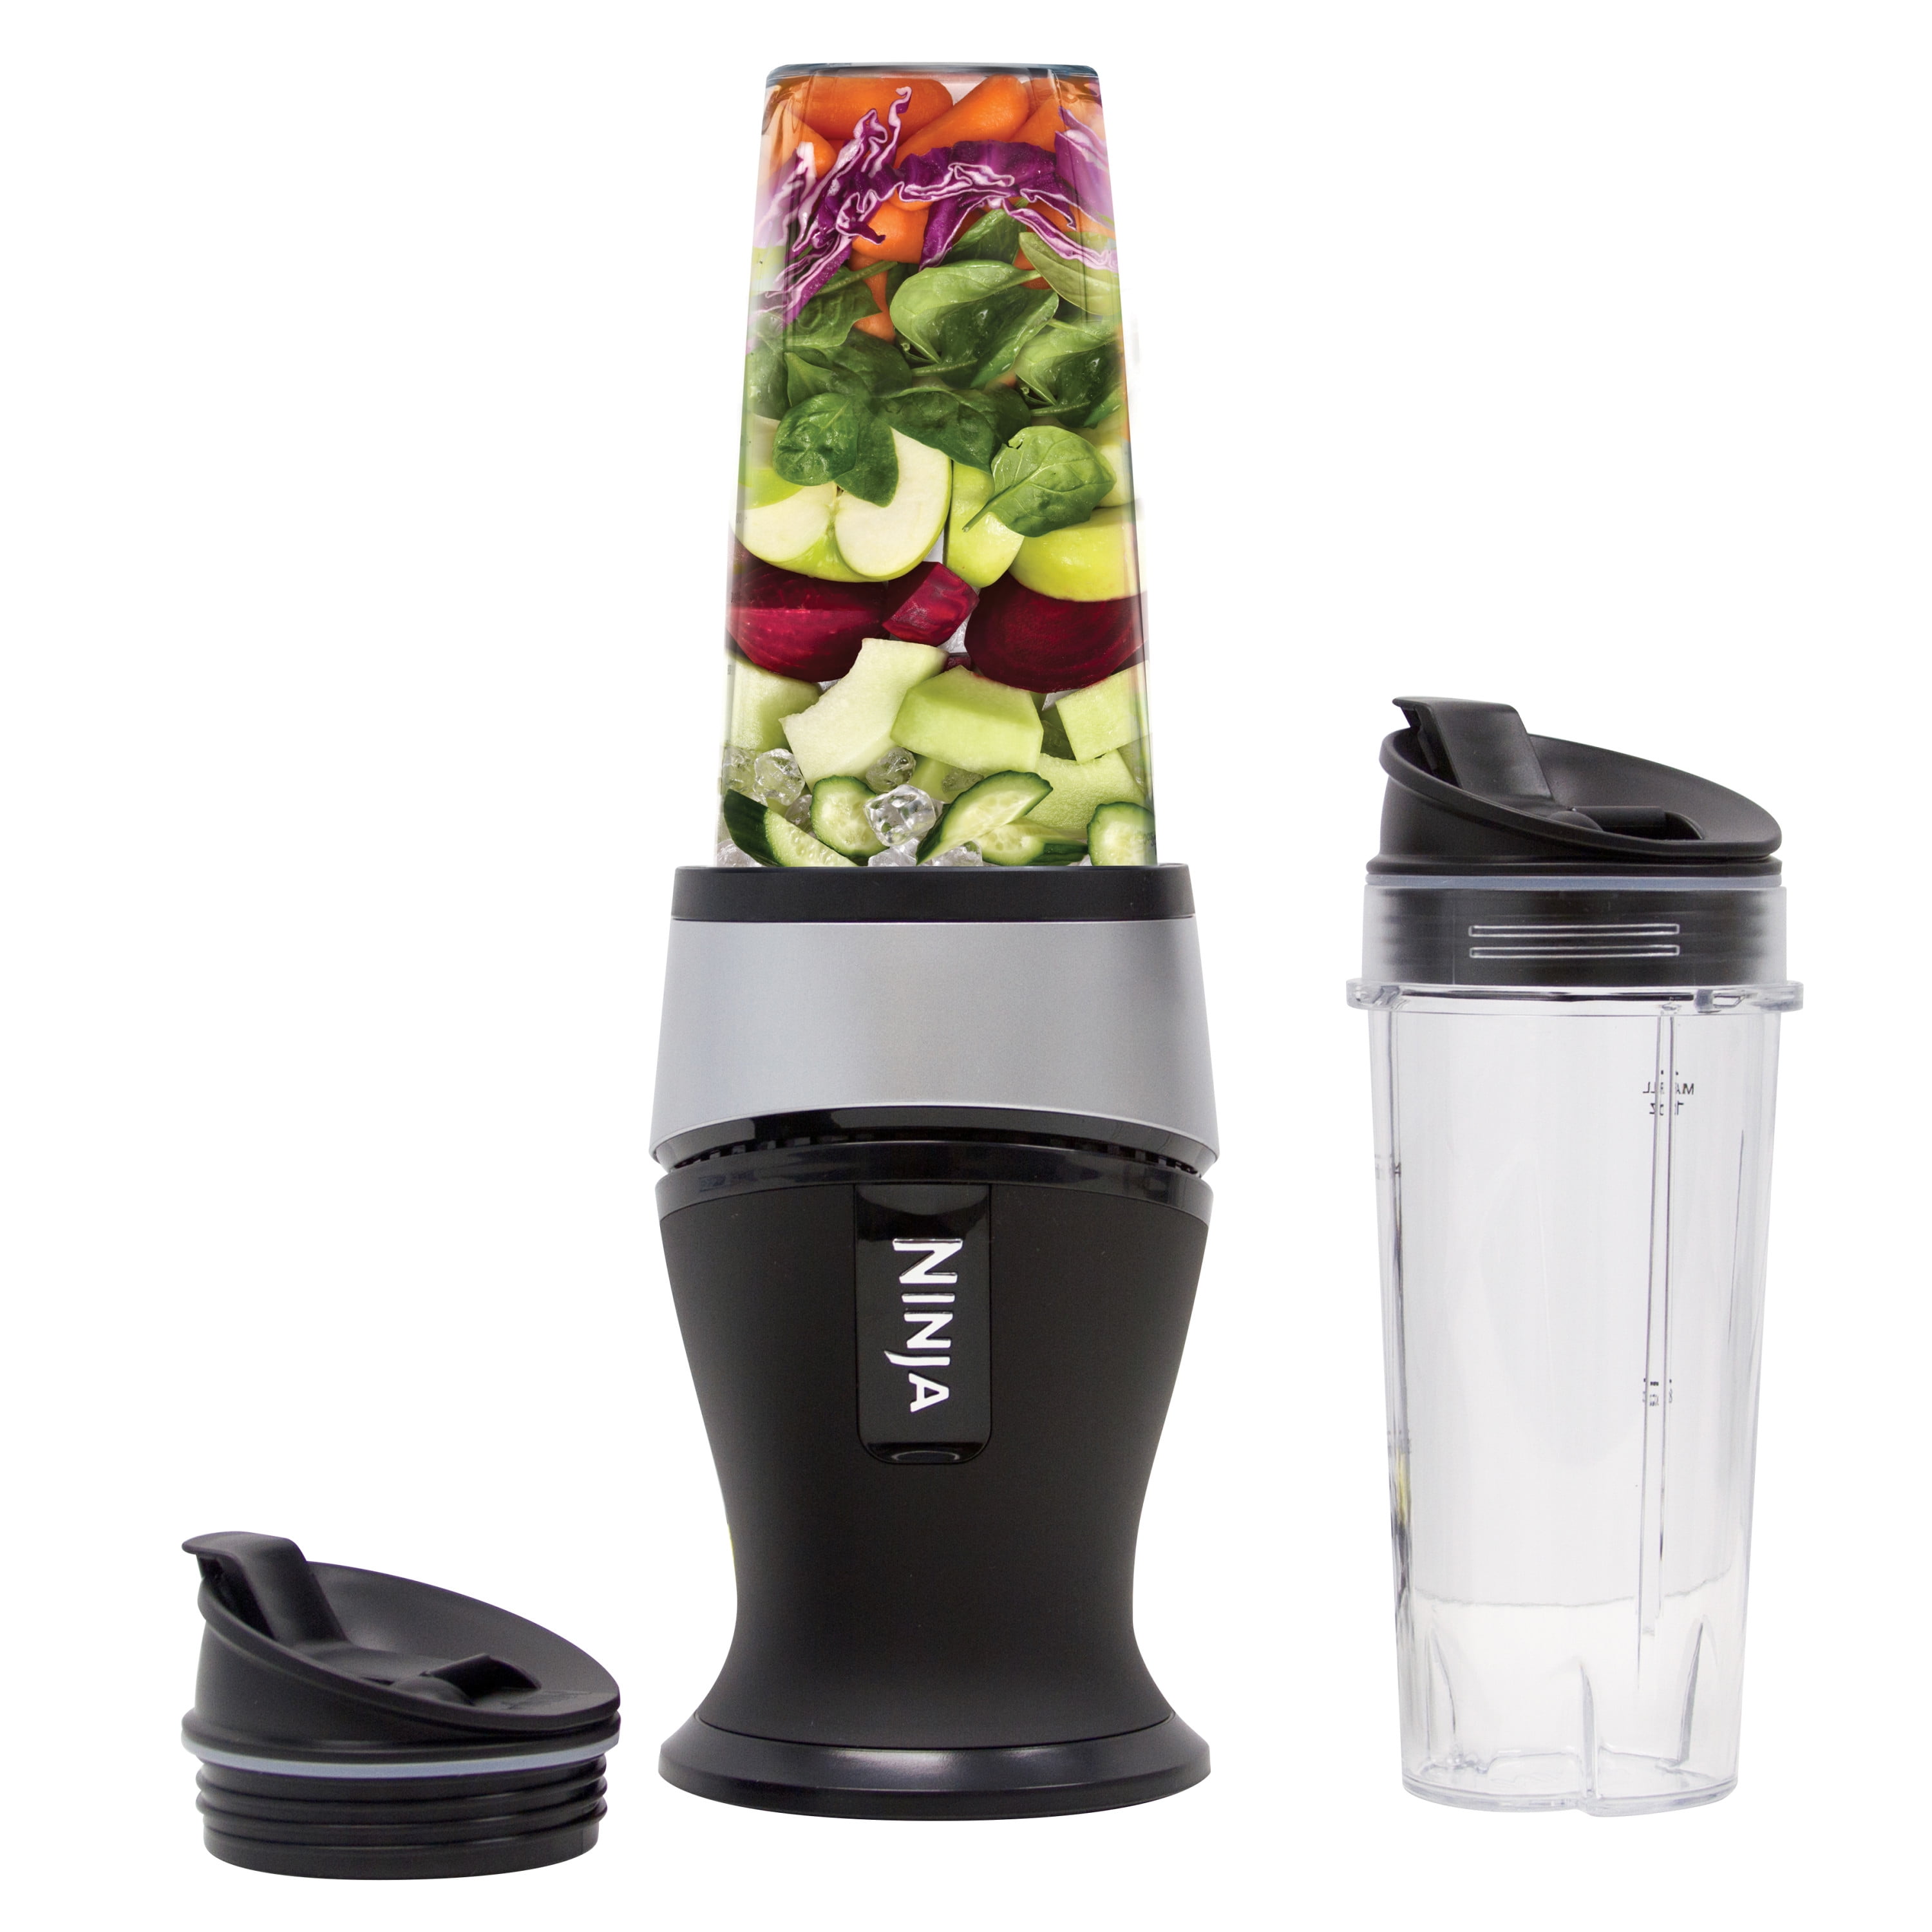 You can bring home a Ninja 600-Watt Nutri Personal Blender from just $25  today (40% off)